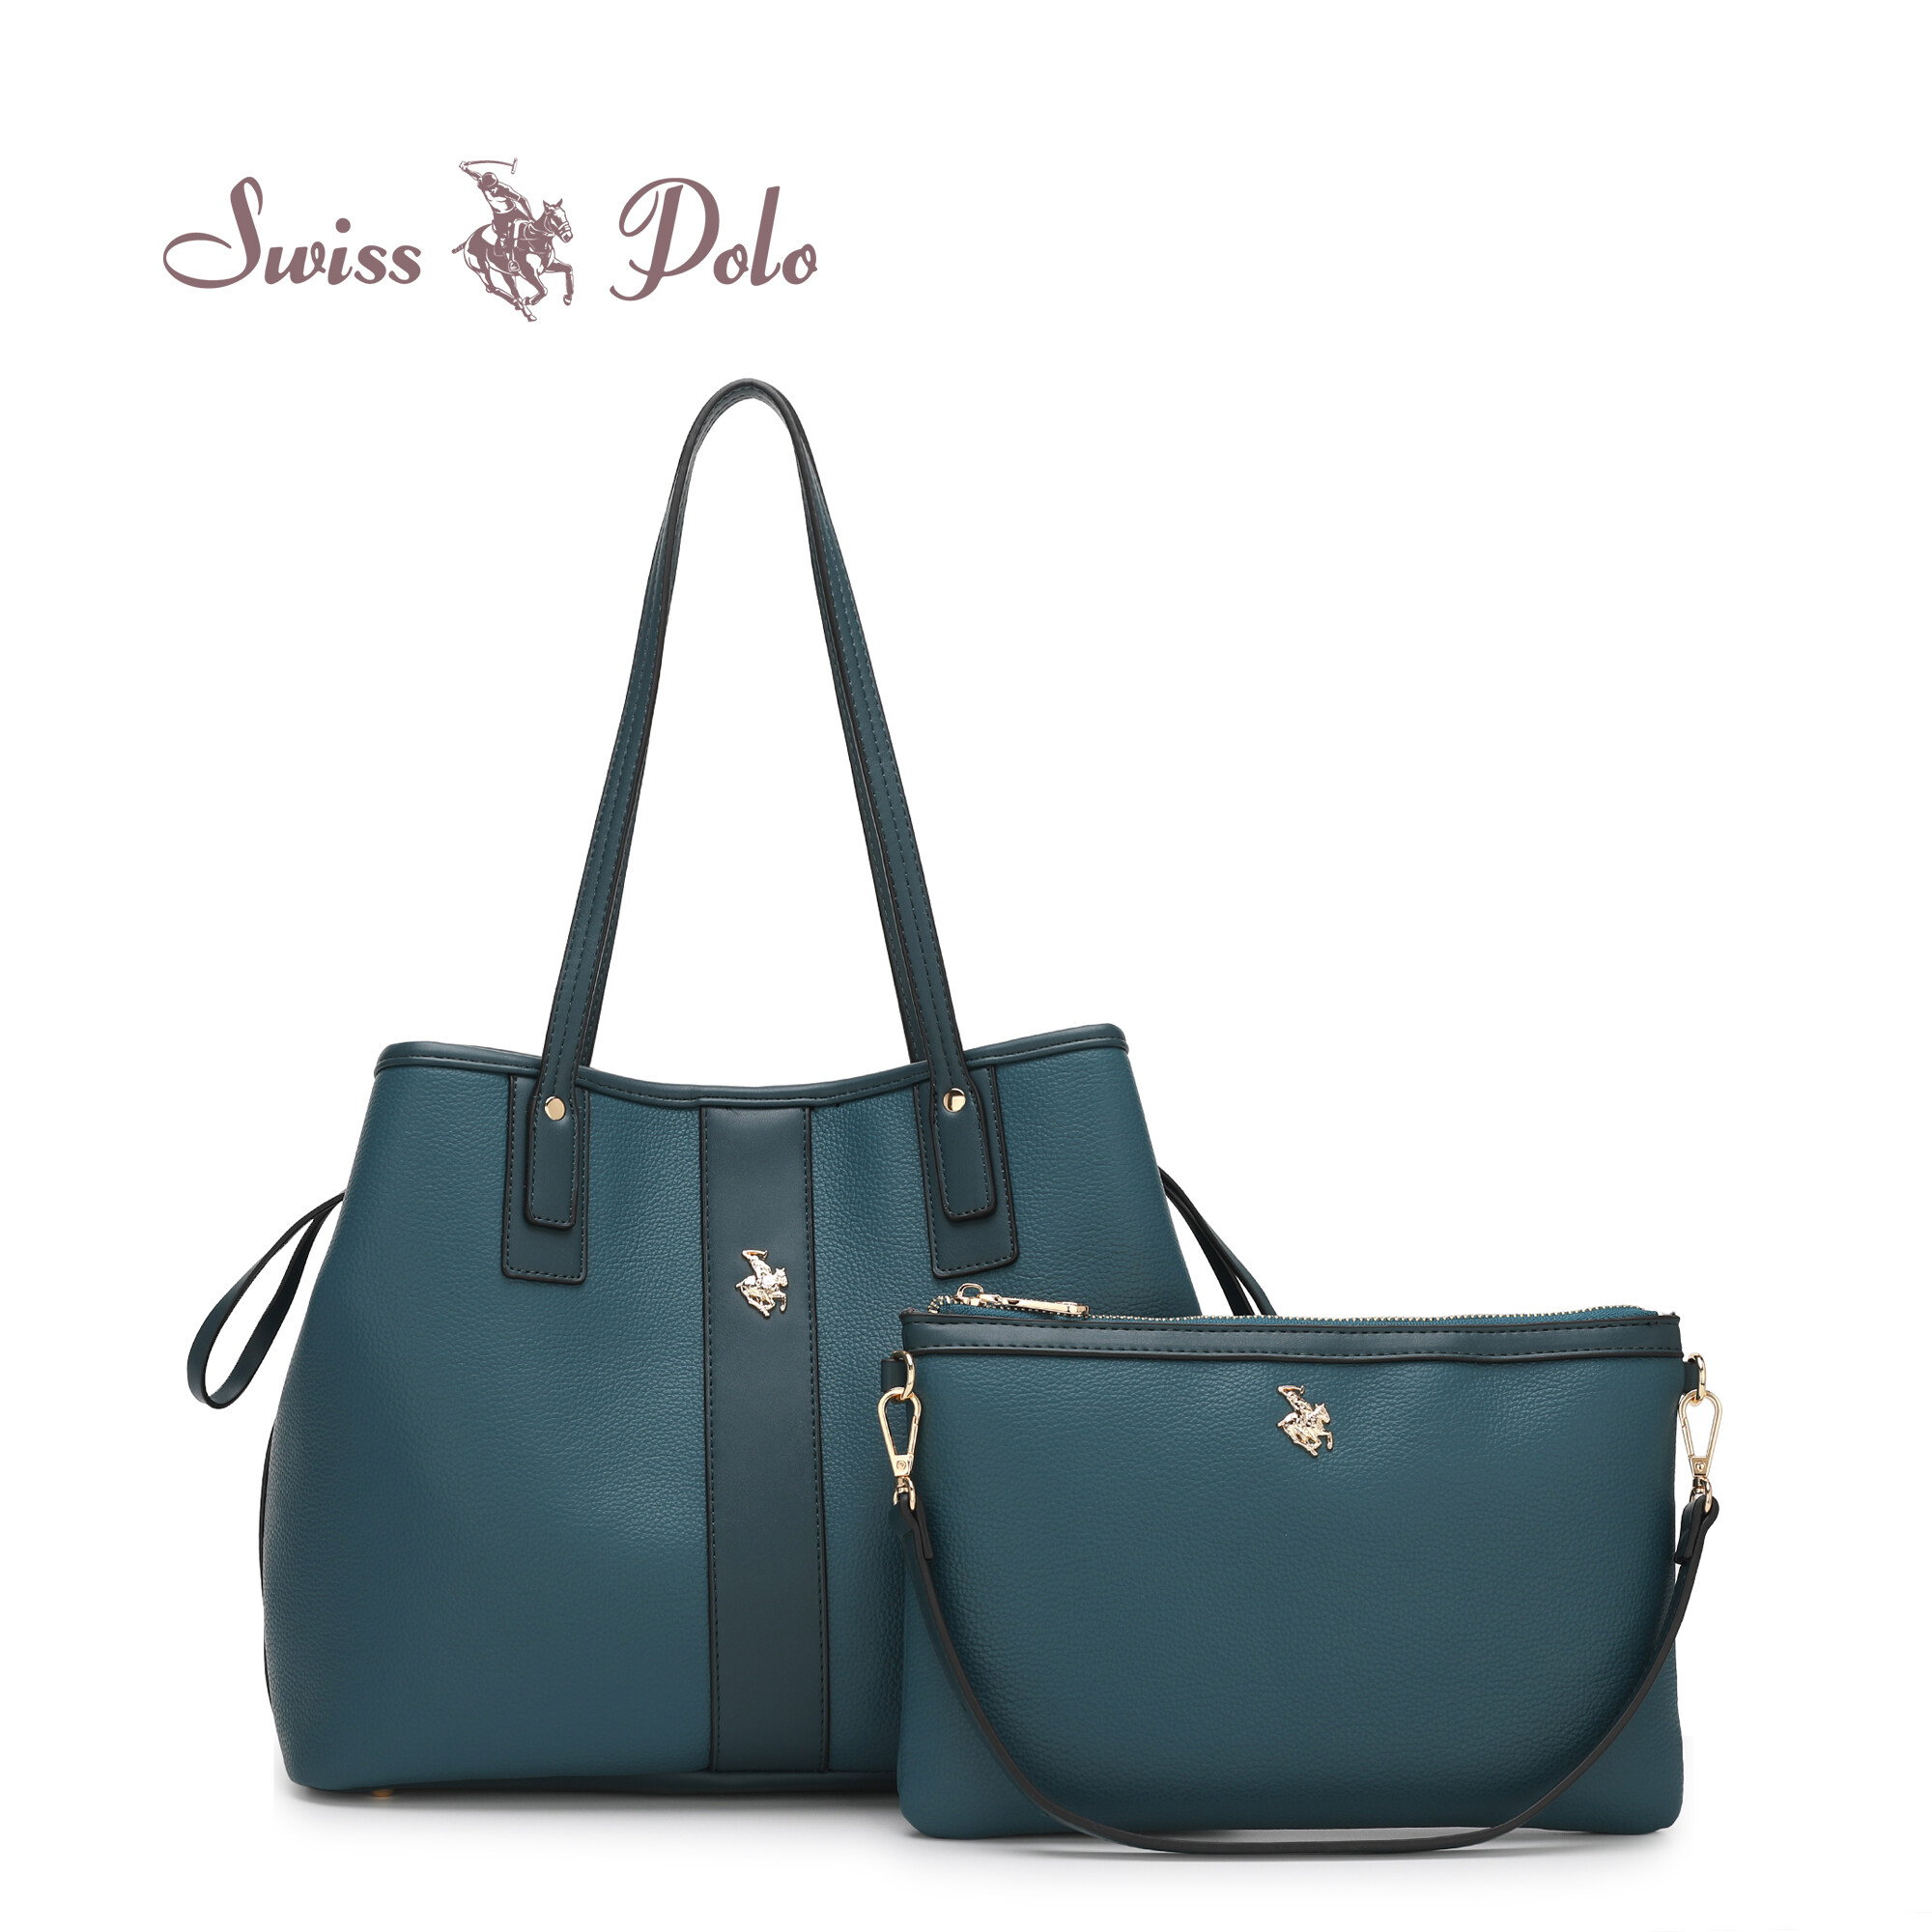 SWISS POLO 2 In 1 Ladies Top Handle Tote Bag With Pouch HFT 7686-4 BLUE